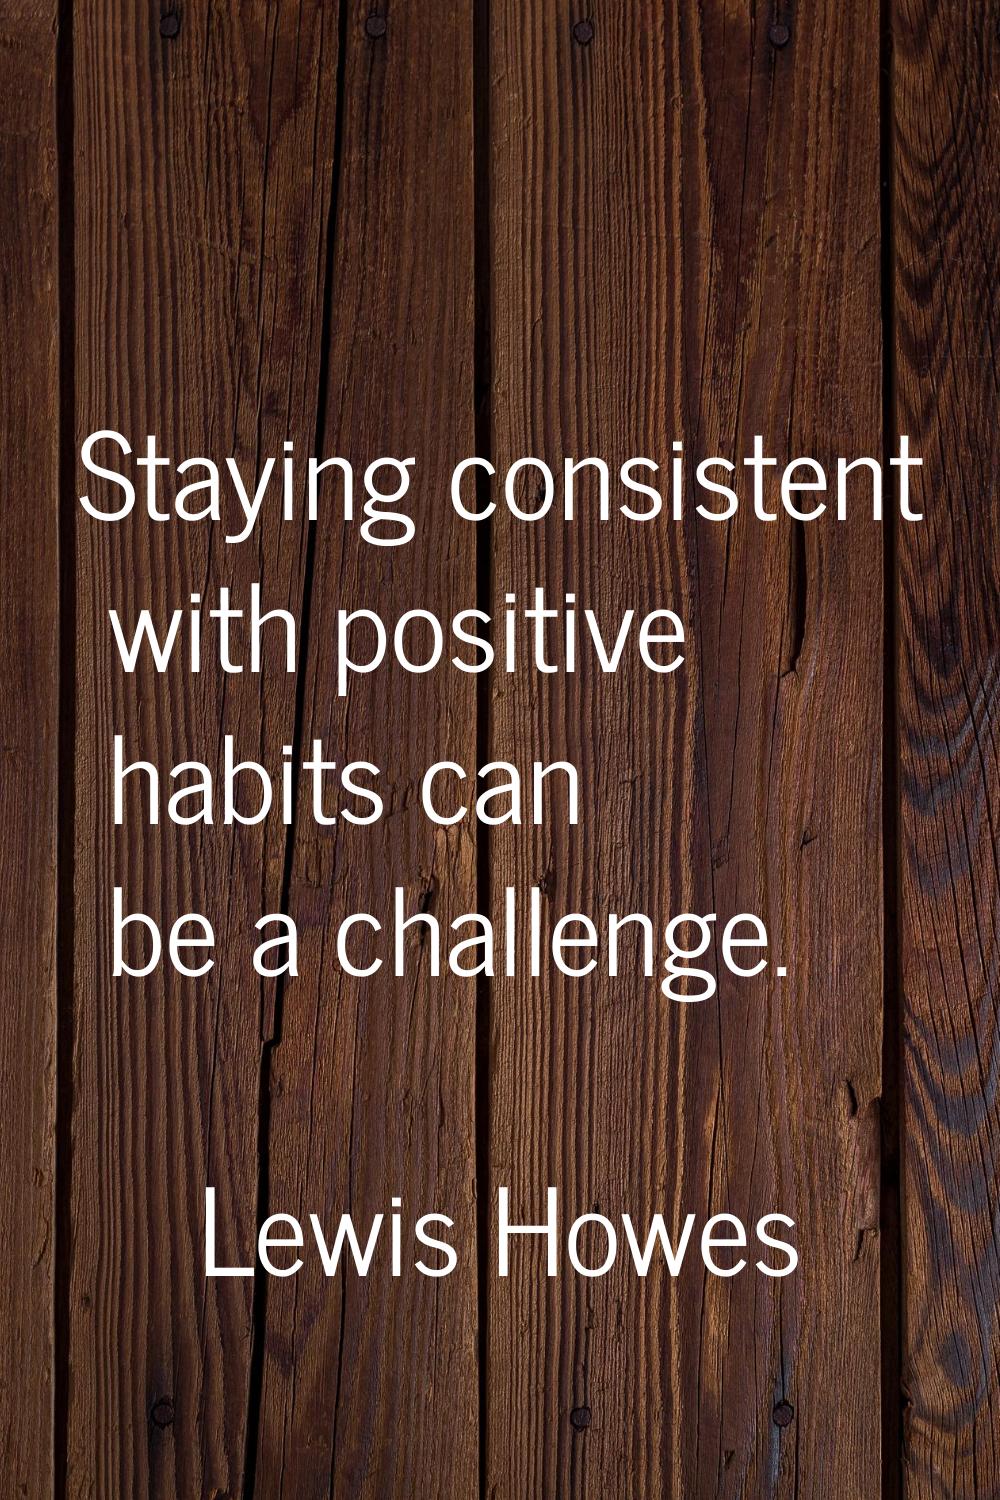 Staying consistent with positive habits can be a challenge.